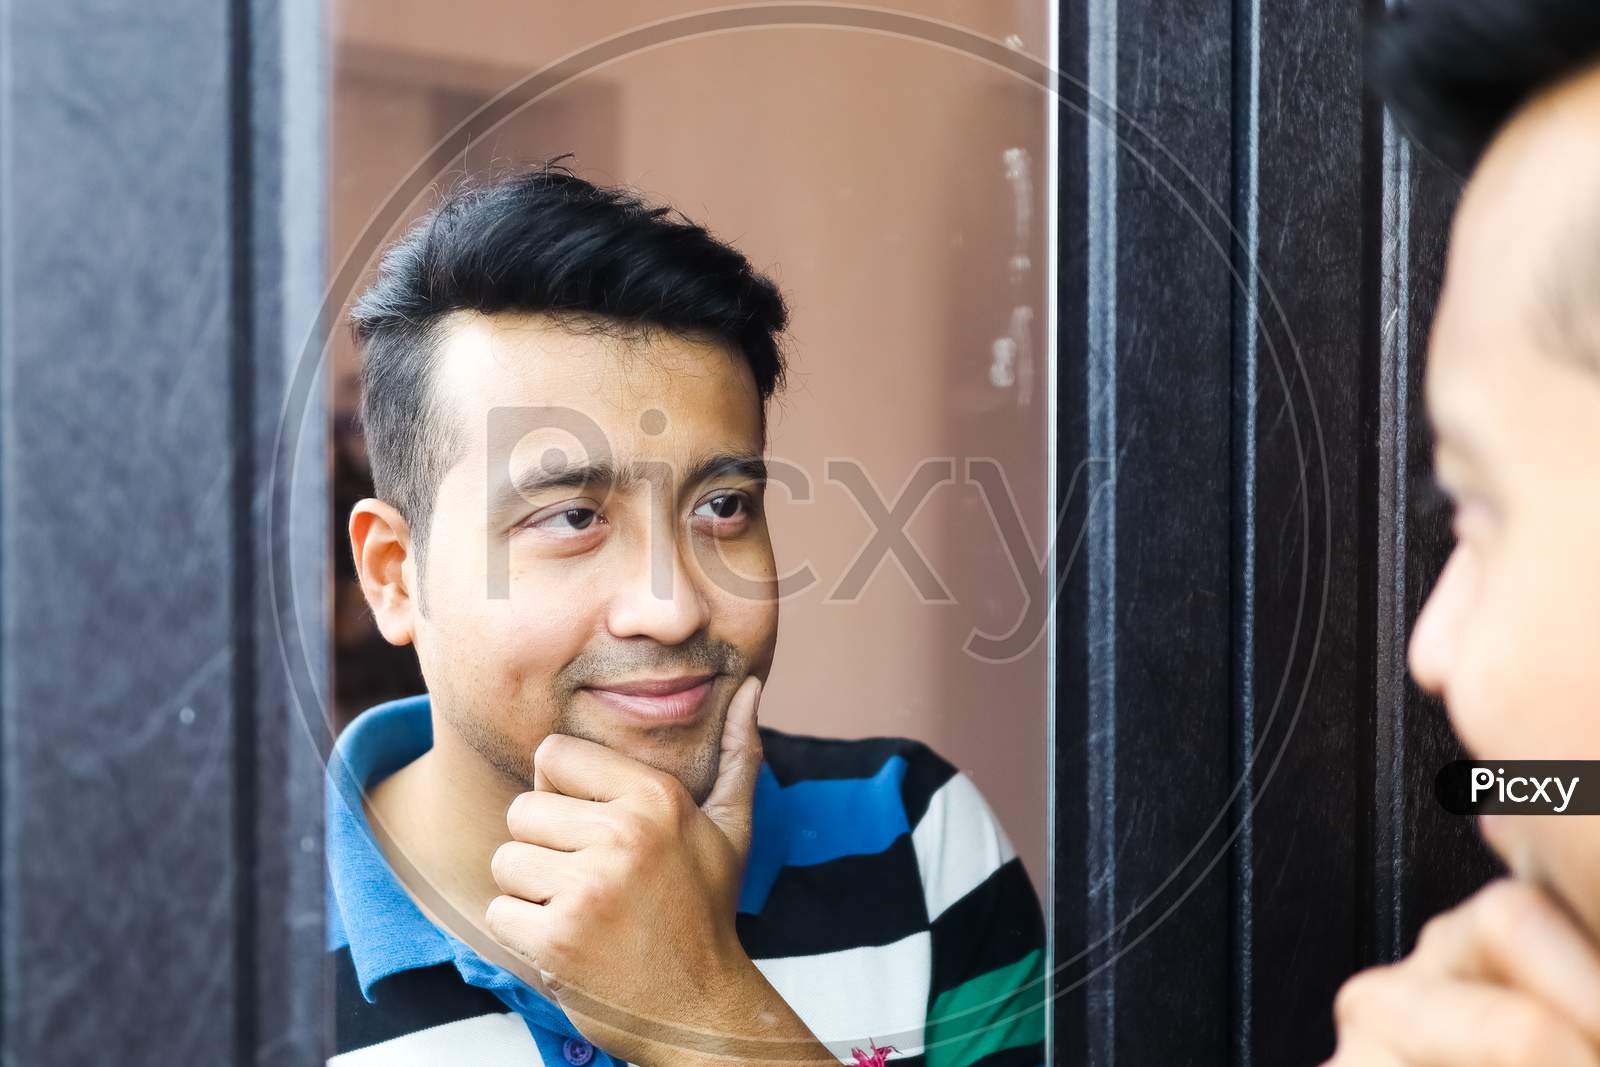 Image Of A Confident Man Looking At His Reflection In Mirror And Making Smile Gesture Ew309324 Picxy 